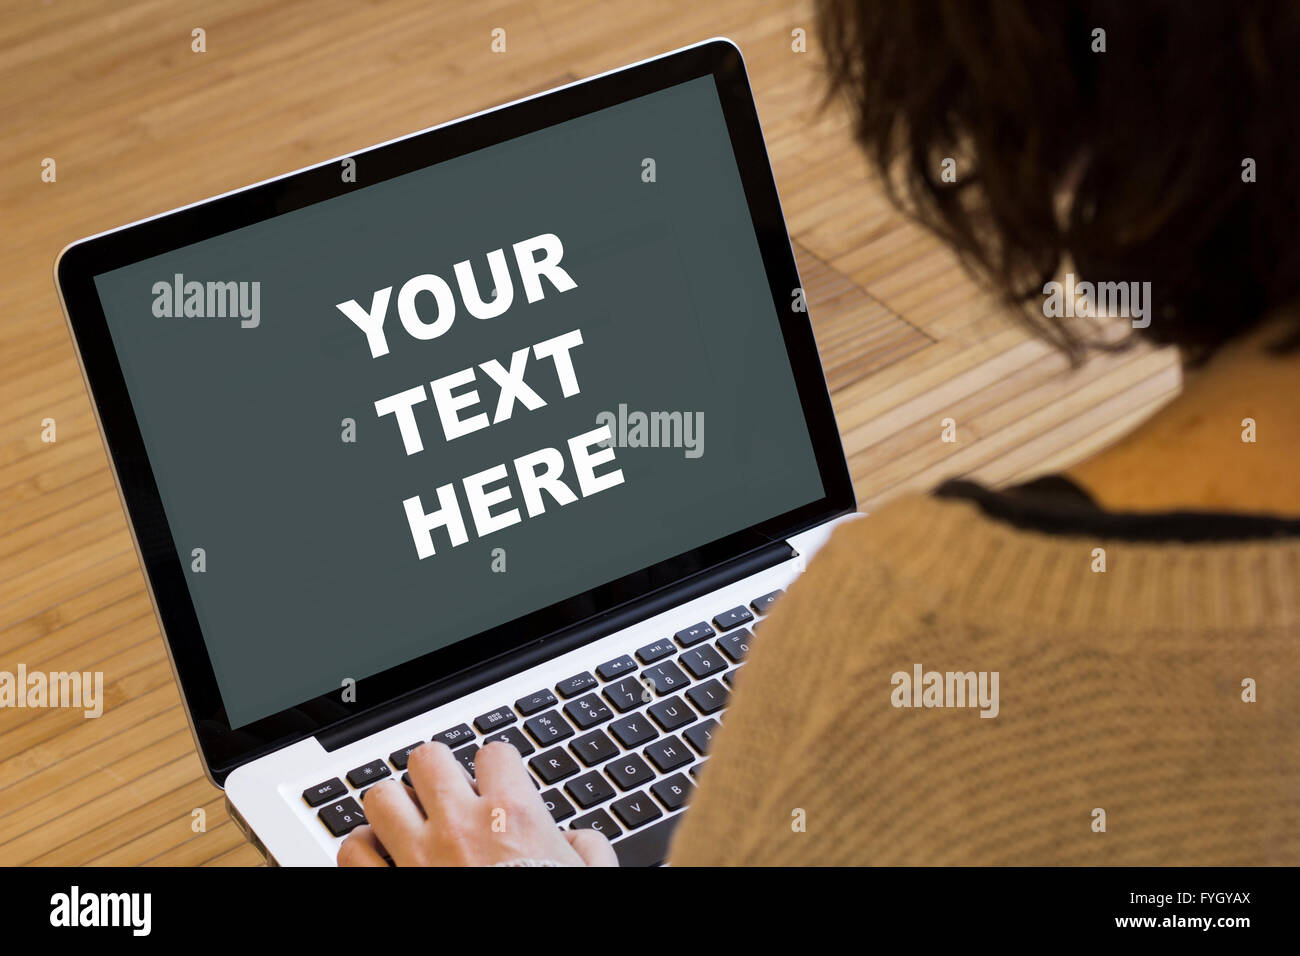 your text here on a laptop screen. Screen graphics are made up. Stock Photo